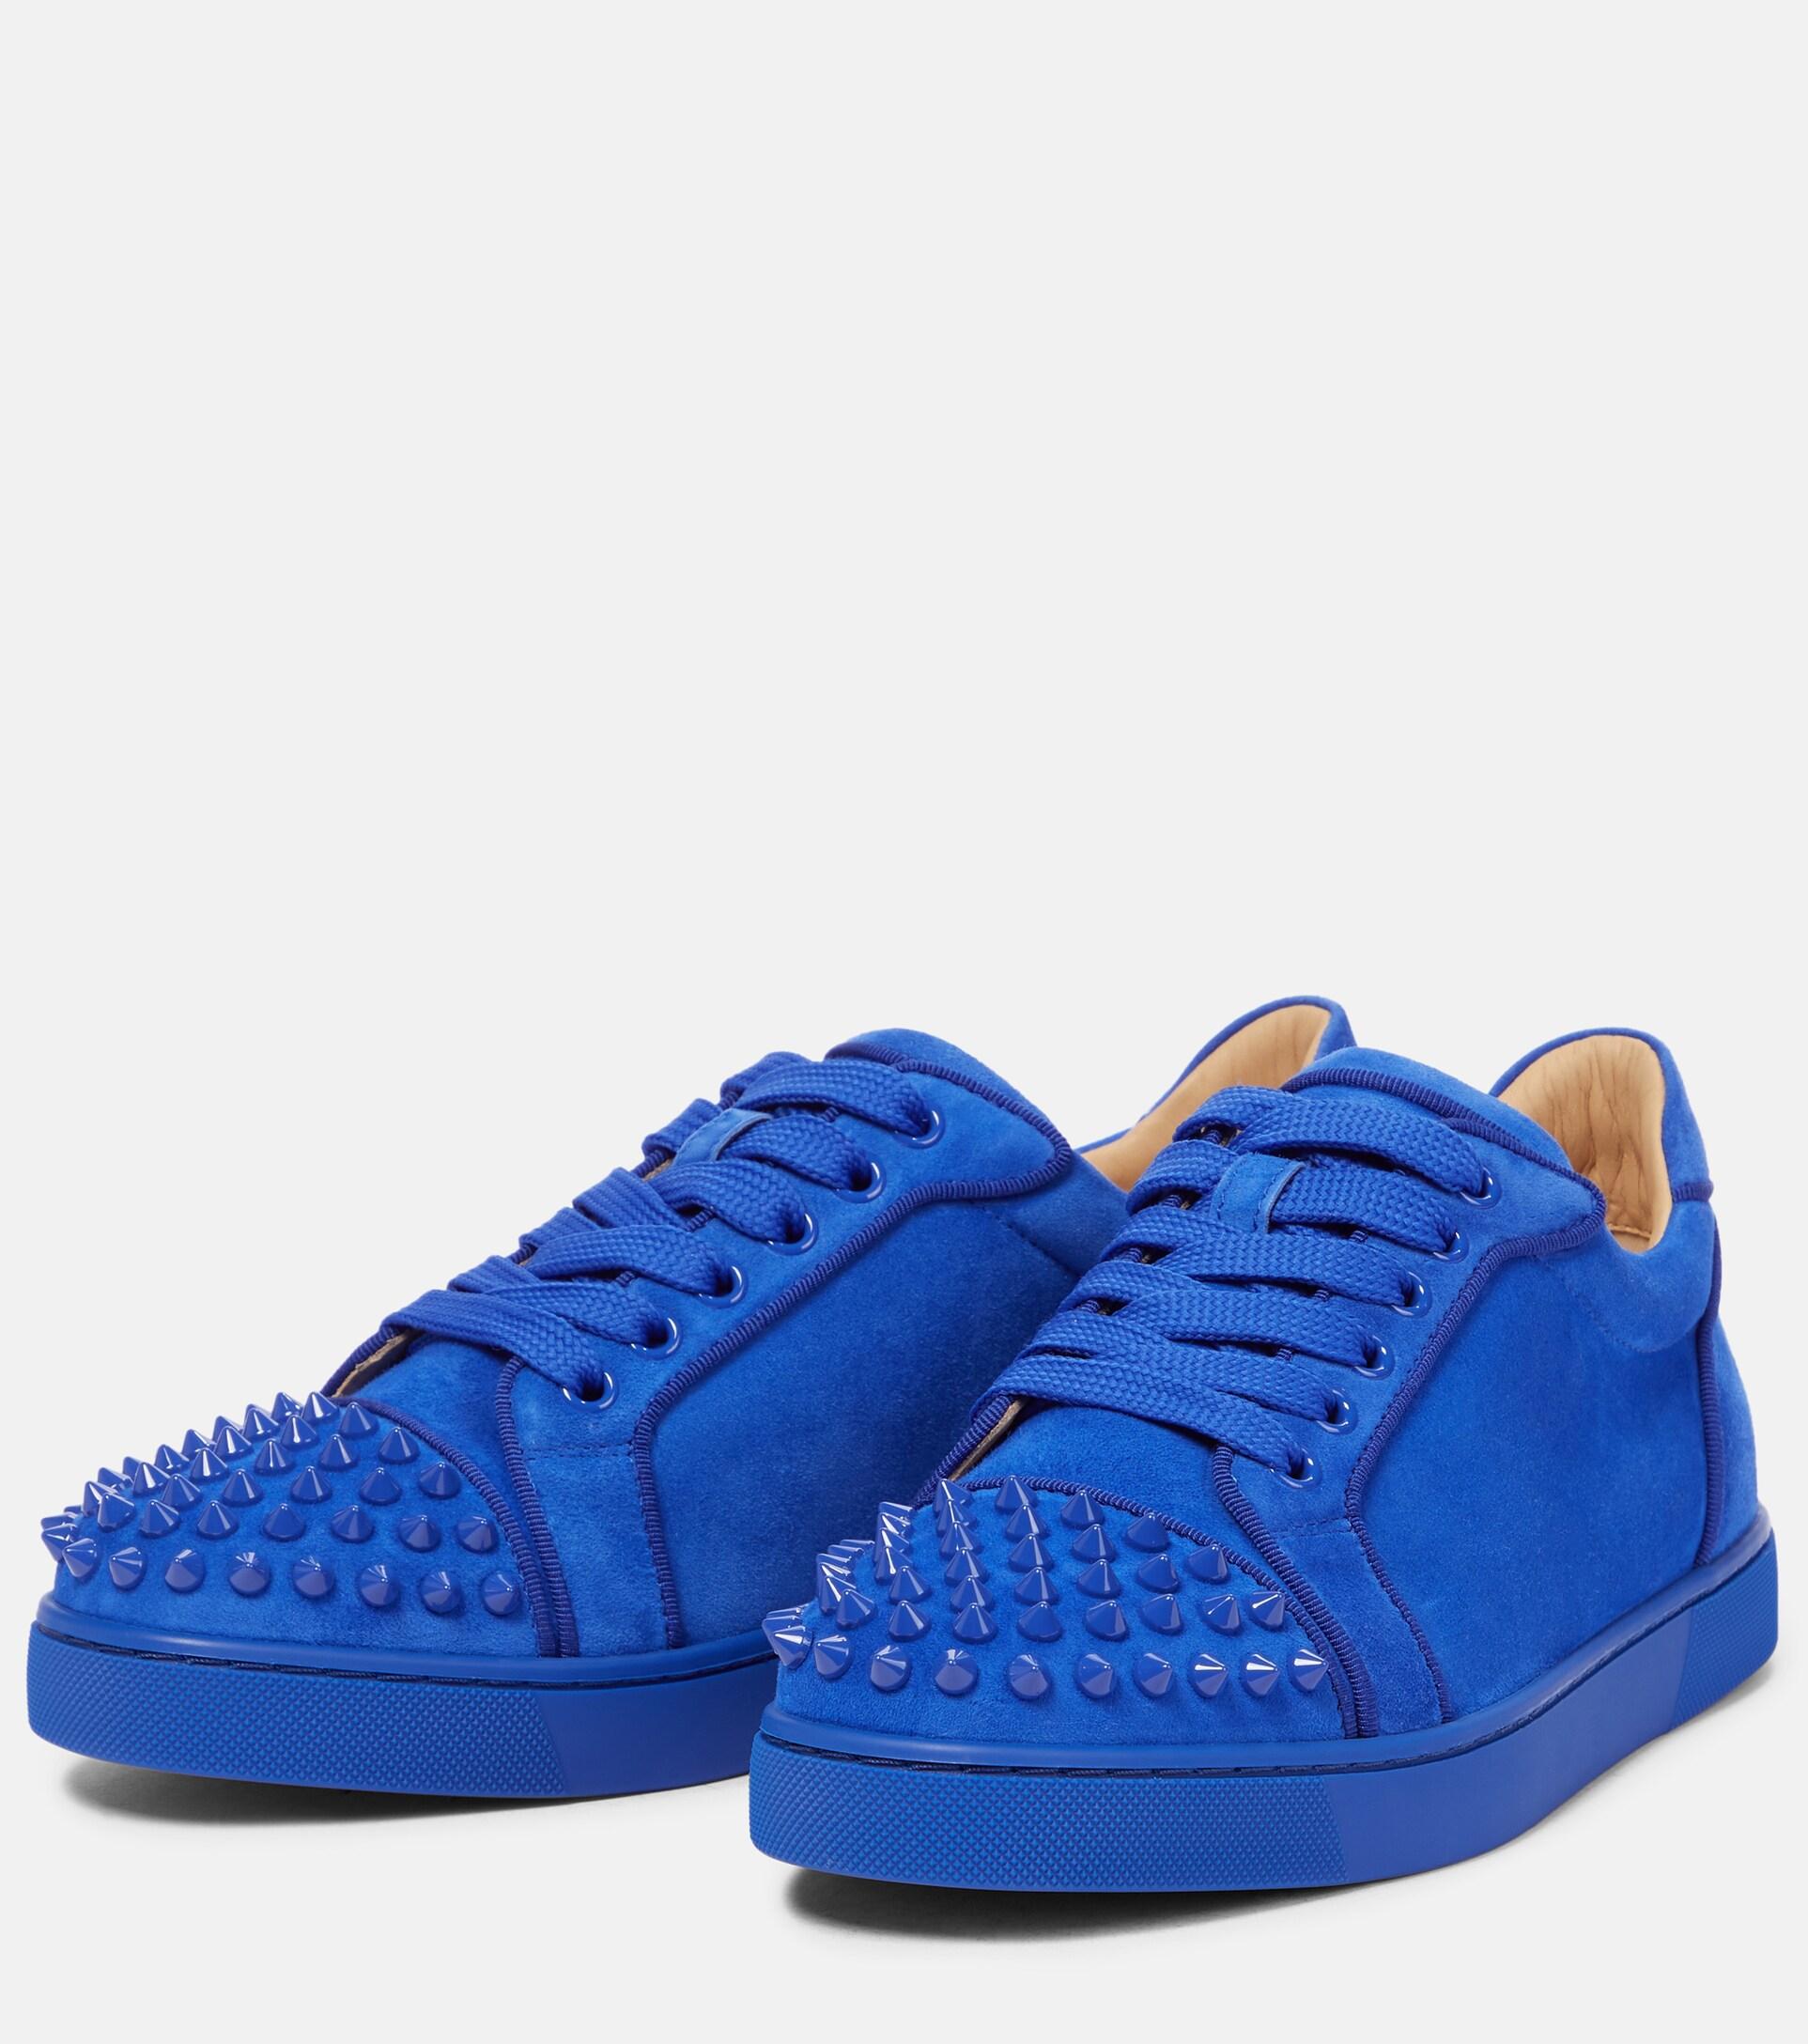 Christian Louboutin Vieira Spikes Suede Sneakers in Blue Lyst